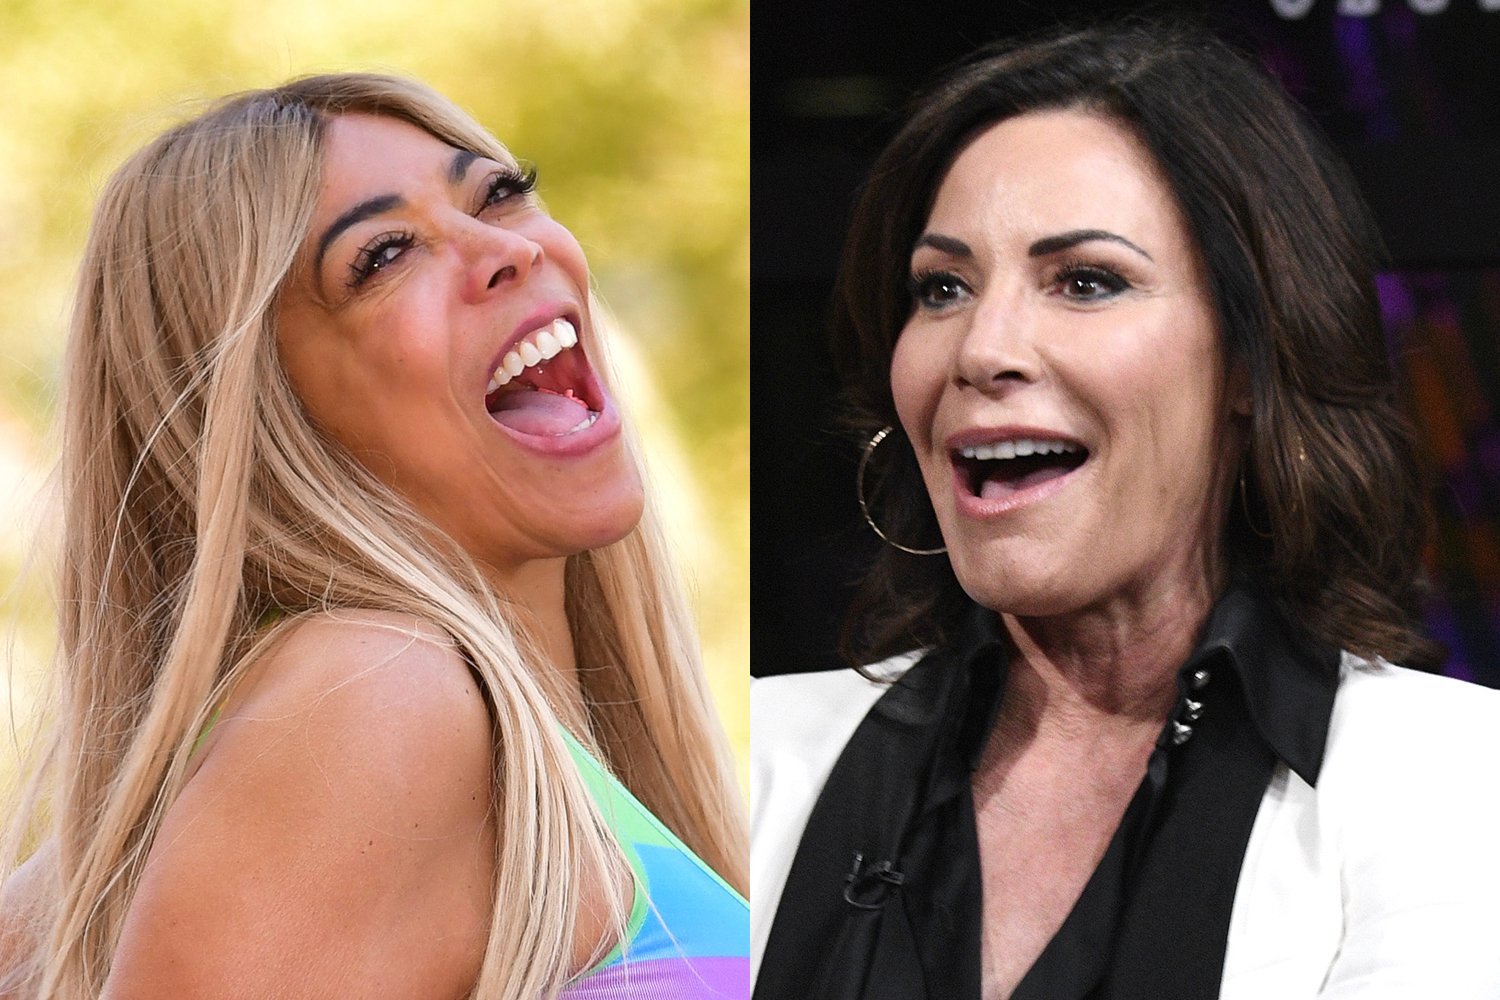 ‘RHONY’ Star Luann de Lesseps Reacts To the Wendy Williams Movie Trailer